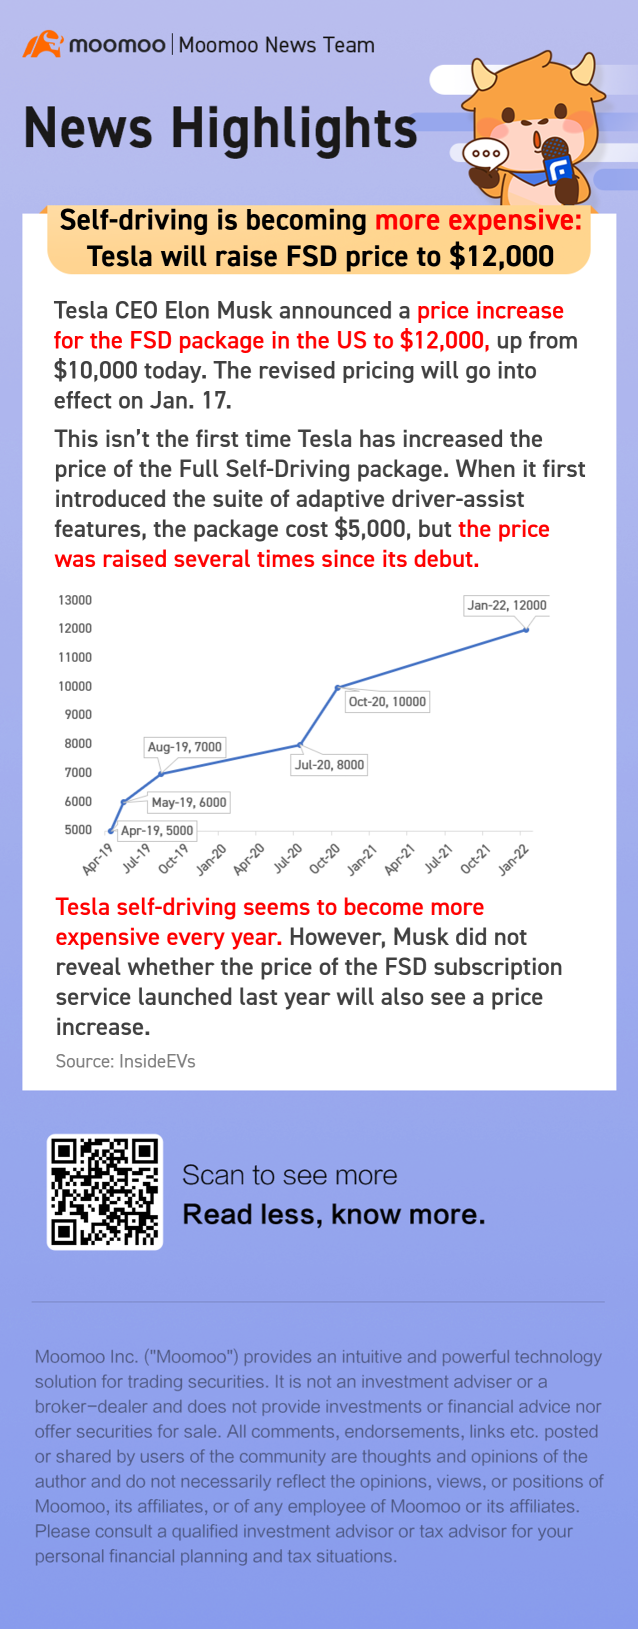 Self-driving is becoming more expensive: Tesla will raise FSD price to $12,000